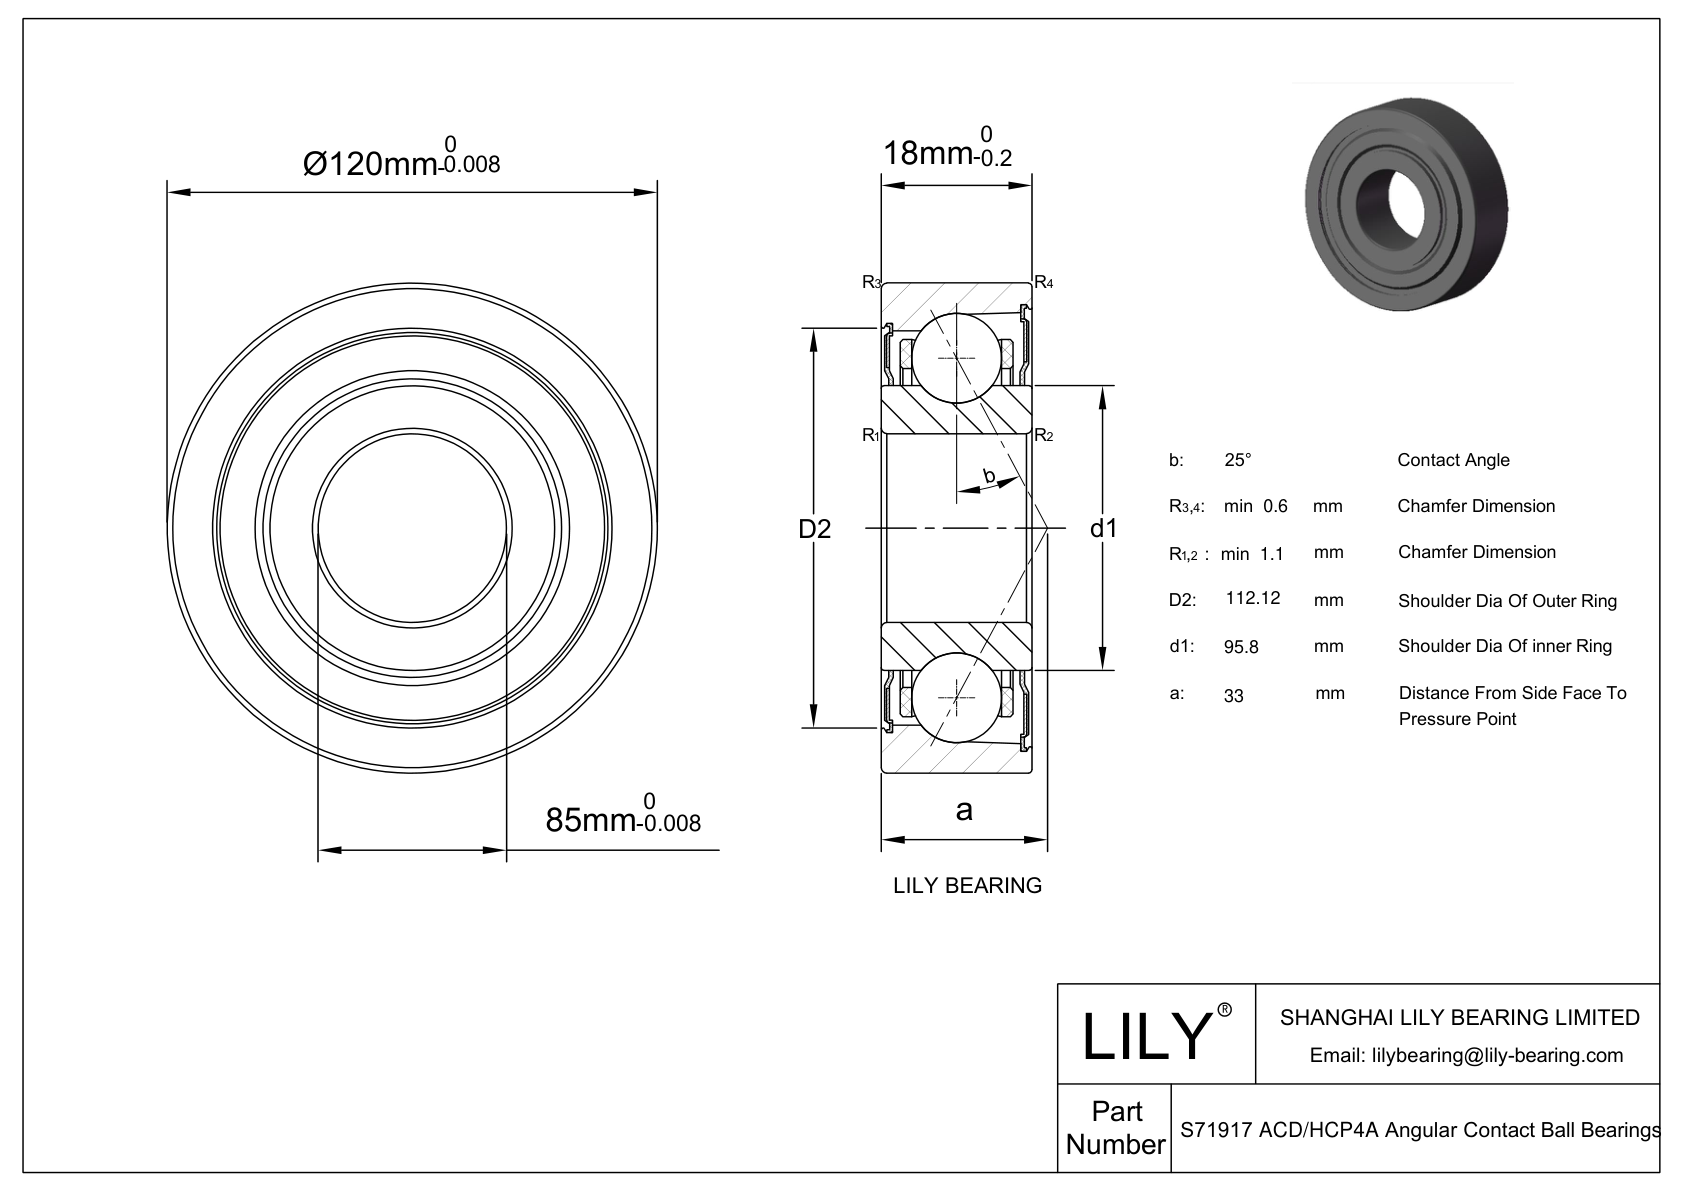 S71917 ACD/HCP4A Super Precision Angular Contact Ball Bearings cad drawing